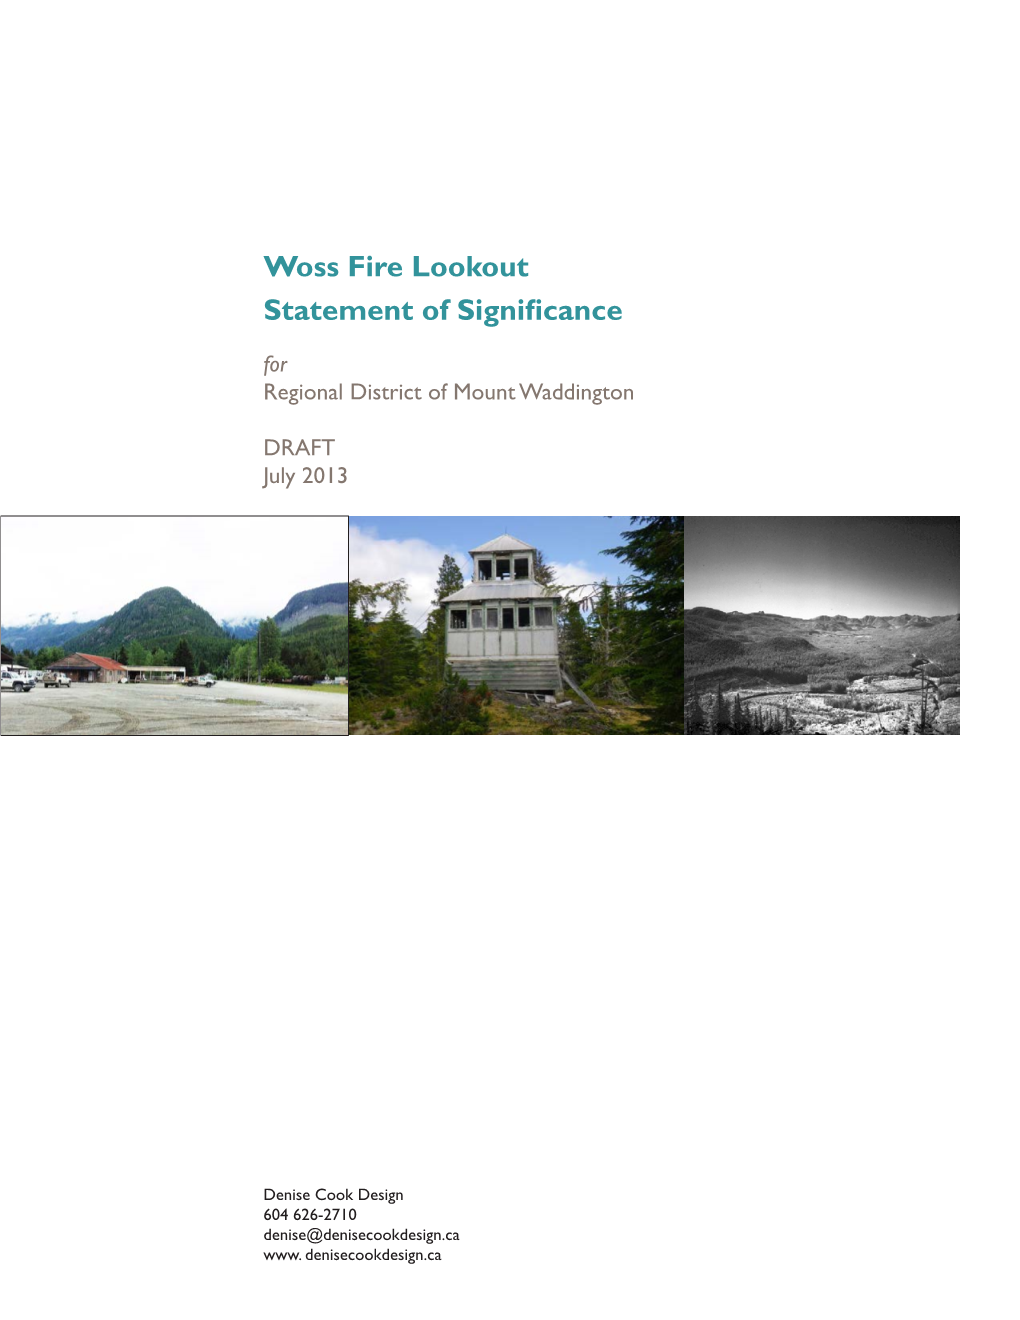 Woss Fire Lookout Statement of Significance for Regional District of Mount Waddington